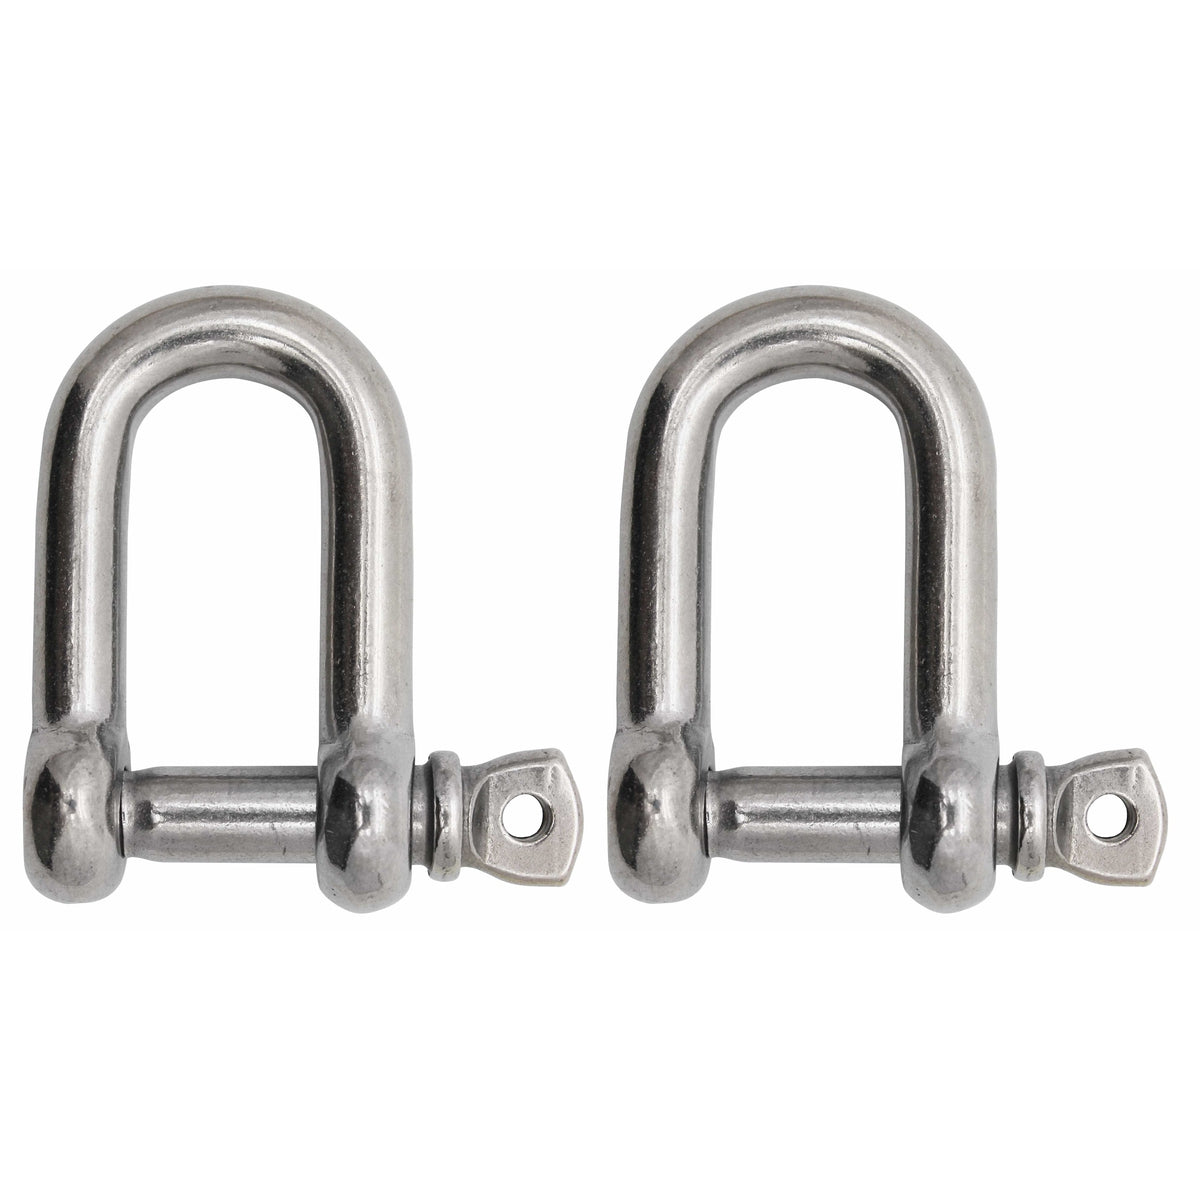 Extreme Max BoatTector SS D Shackle 3/4" 2-pk #3006.8252.2